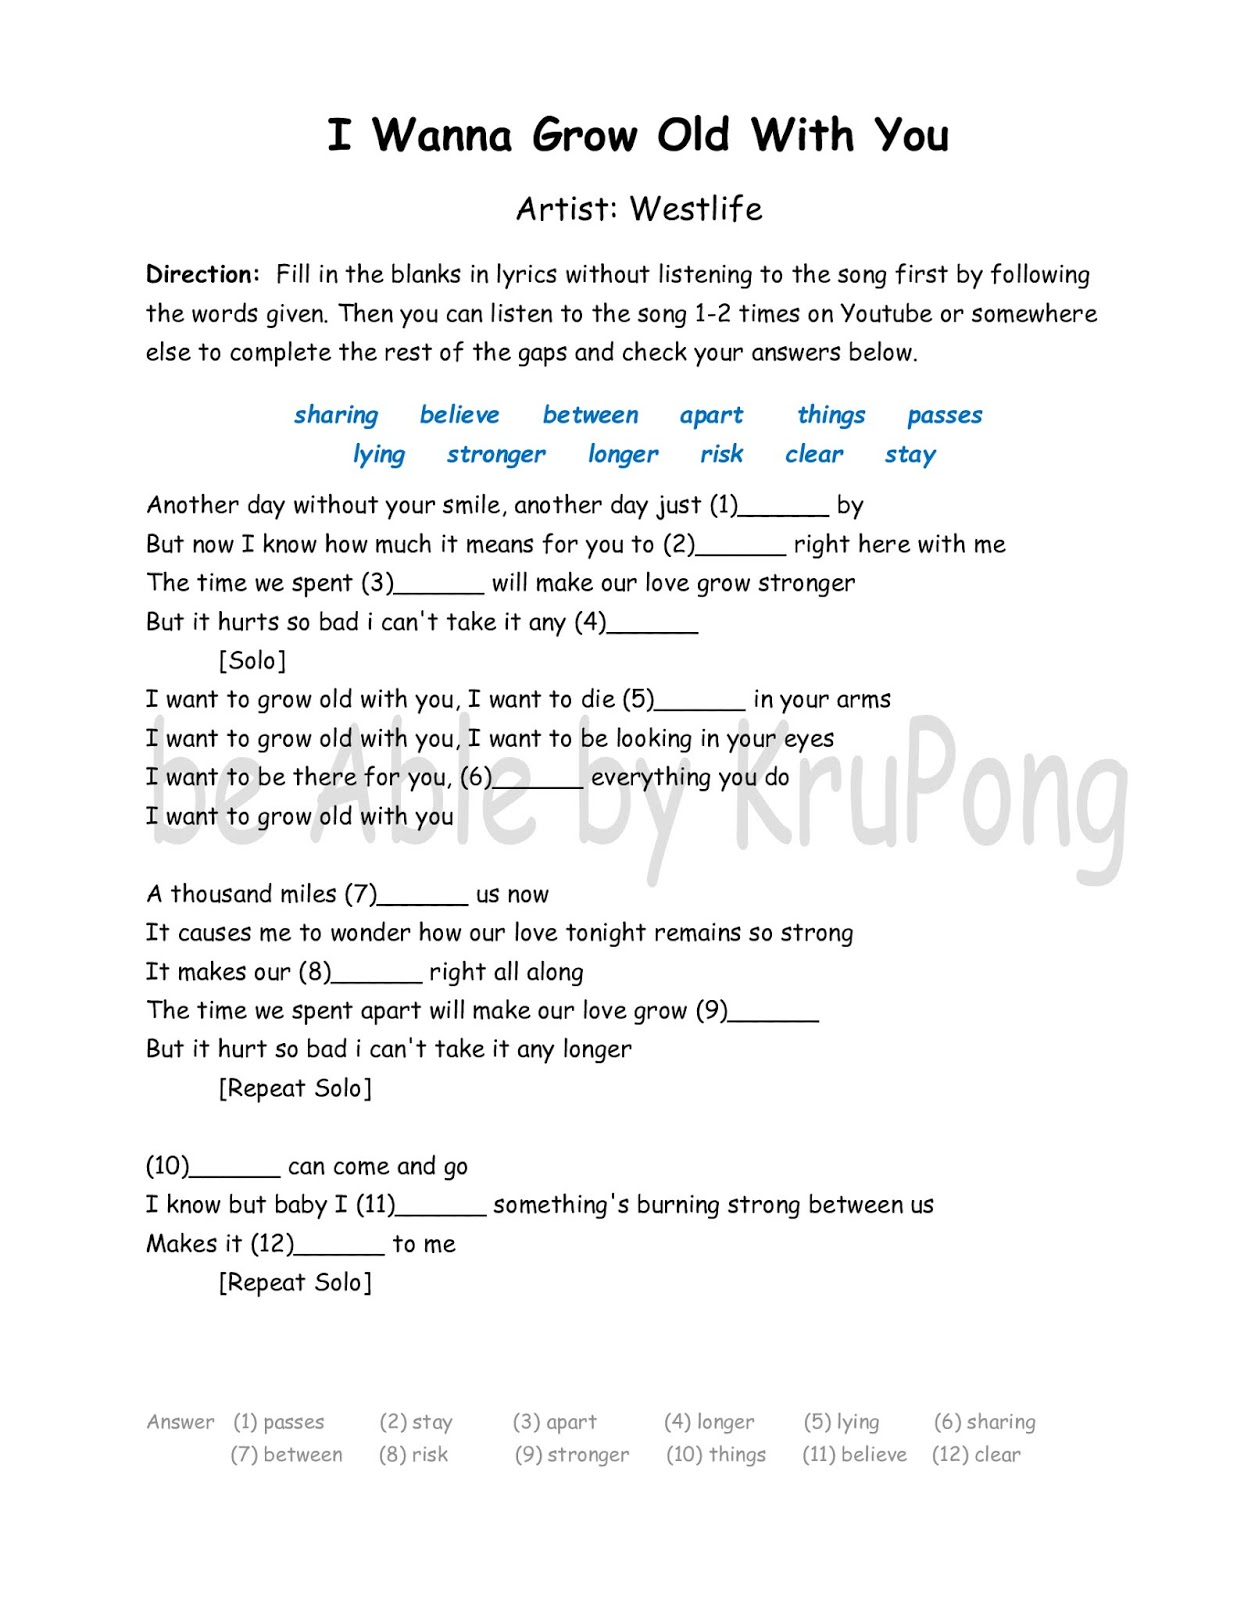 Be Able By คร โป ง I Wanna Grow Old With You Lyrics Worksheet